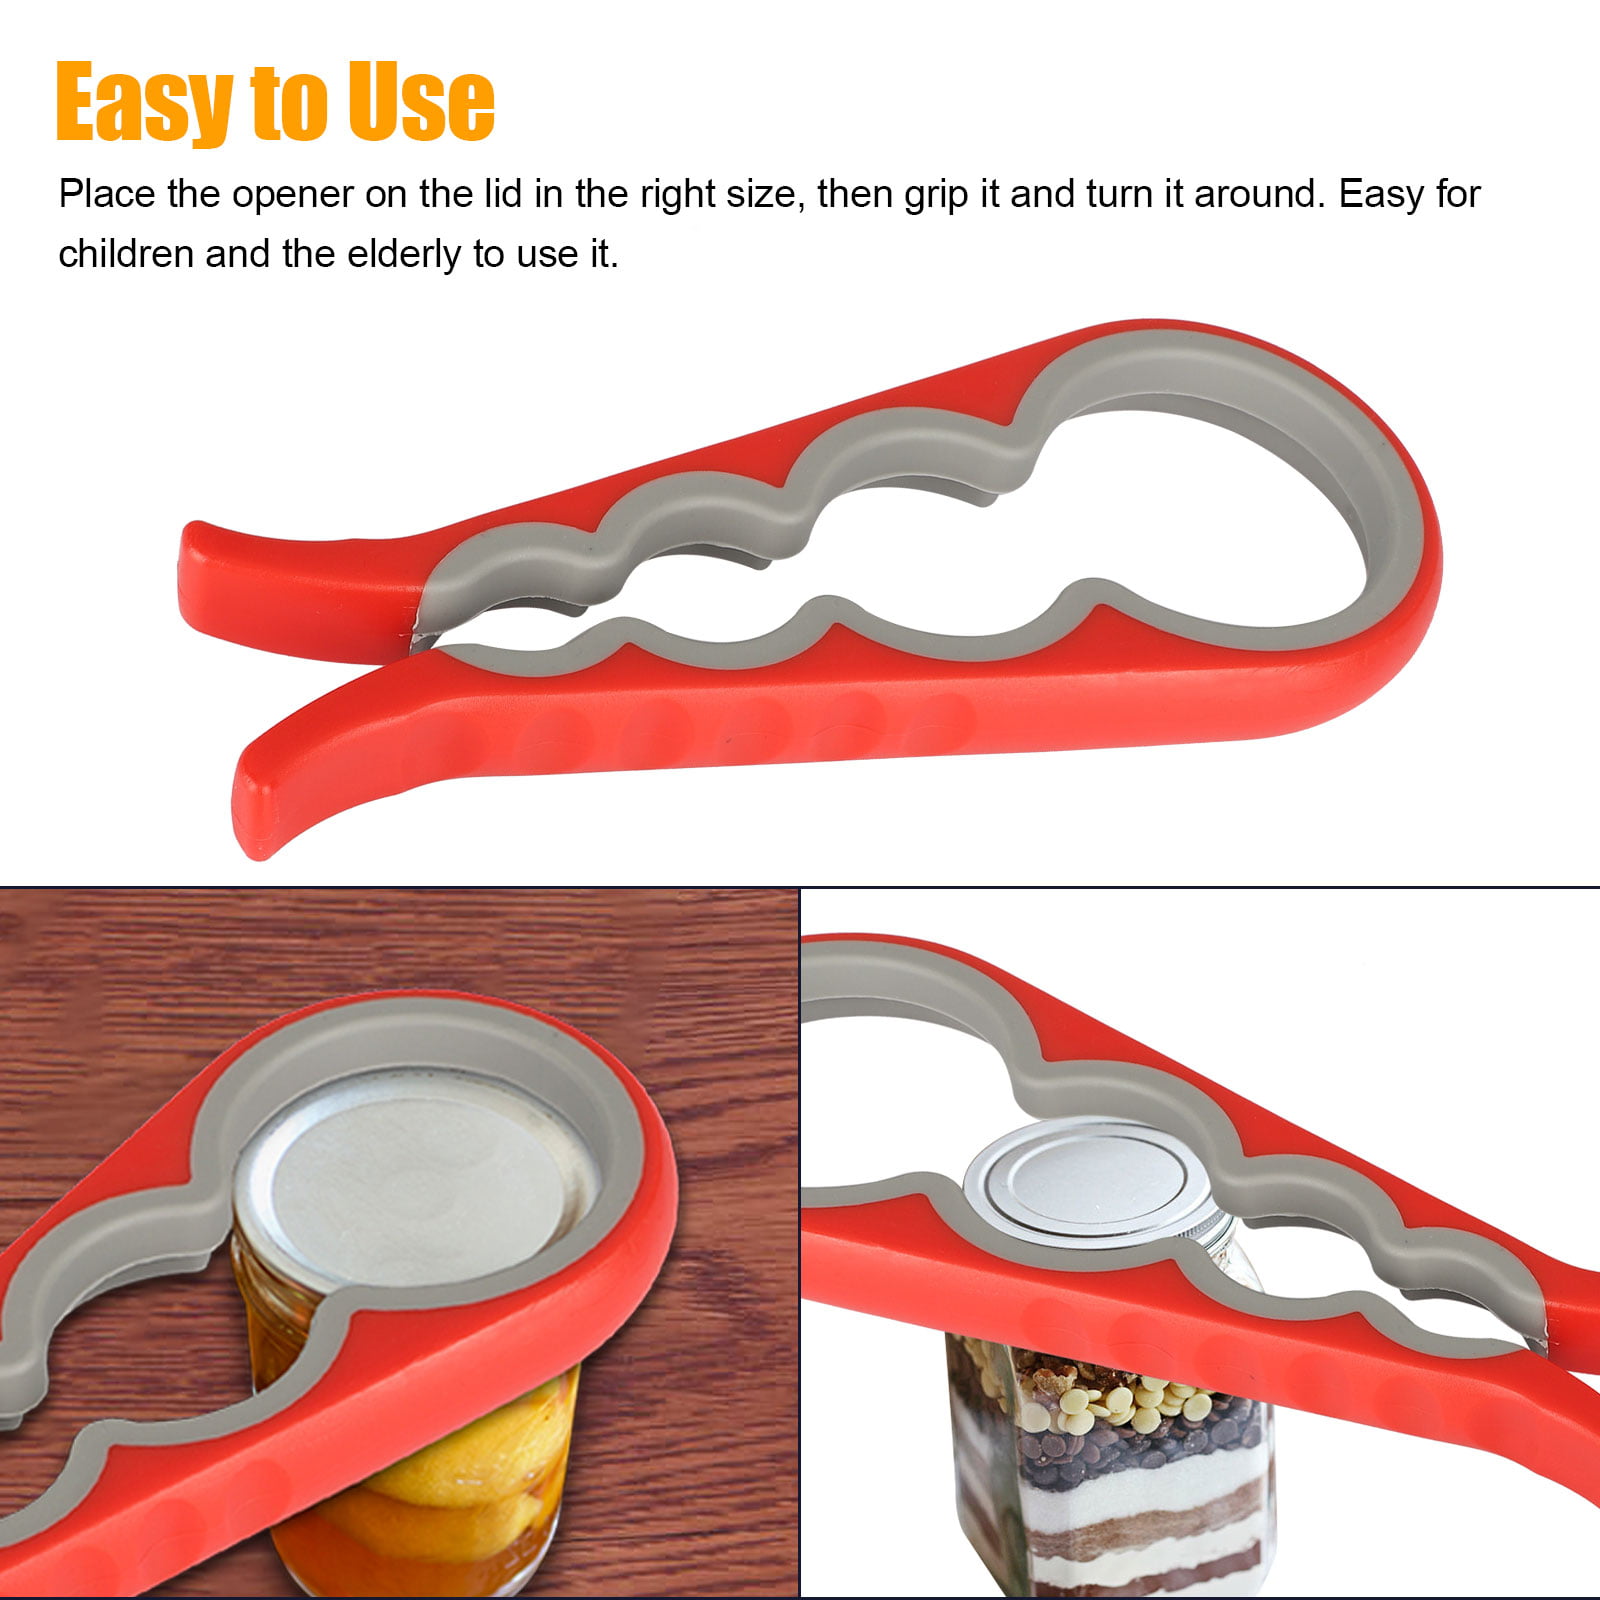 Easi-Twist Easy Grip Jar Opener, Quick Opening For Cooking or Everyday Use  - Simple To Use For Children, Elderly and Arthritis Sufferers - 1 Piece  Colors May Vary 